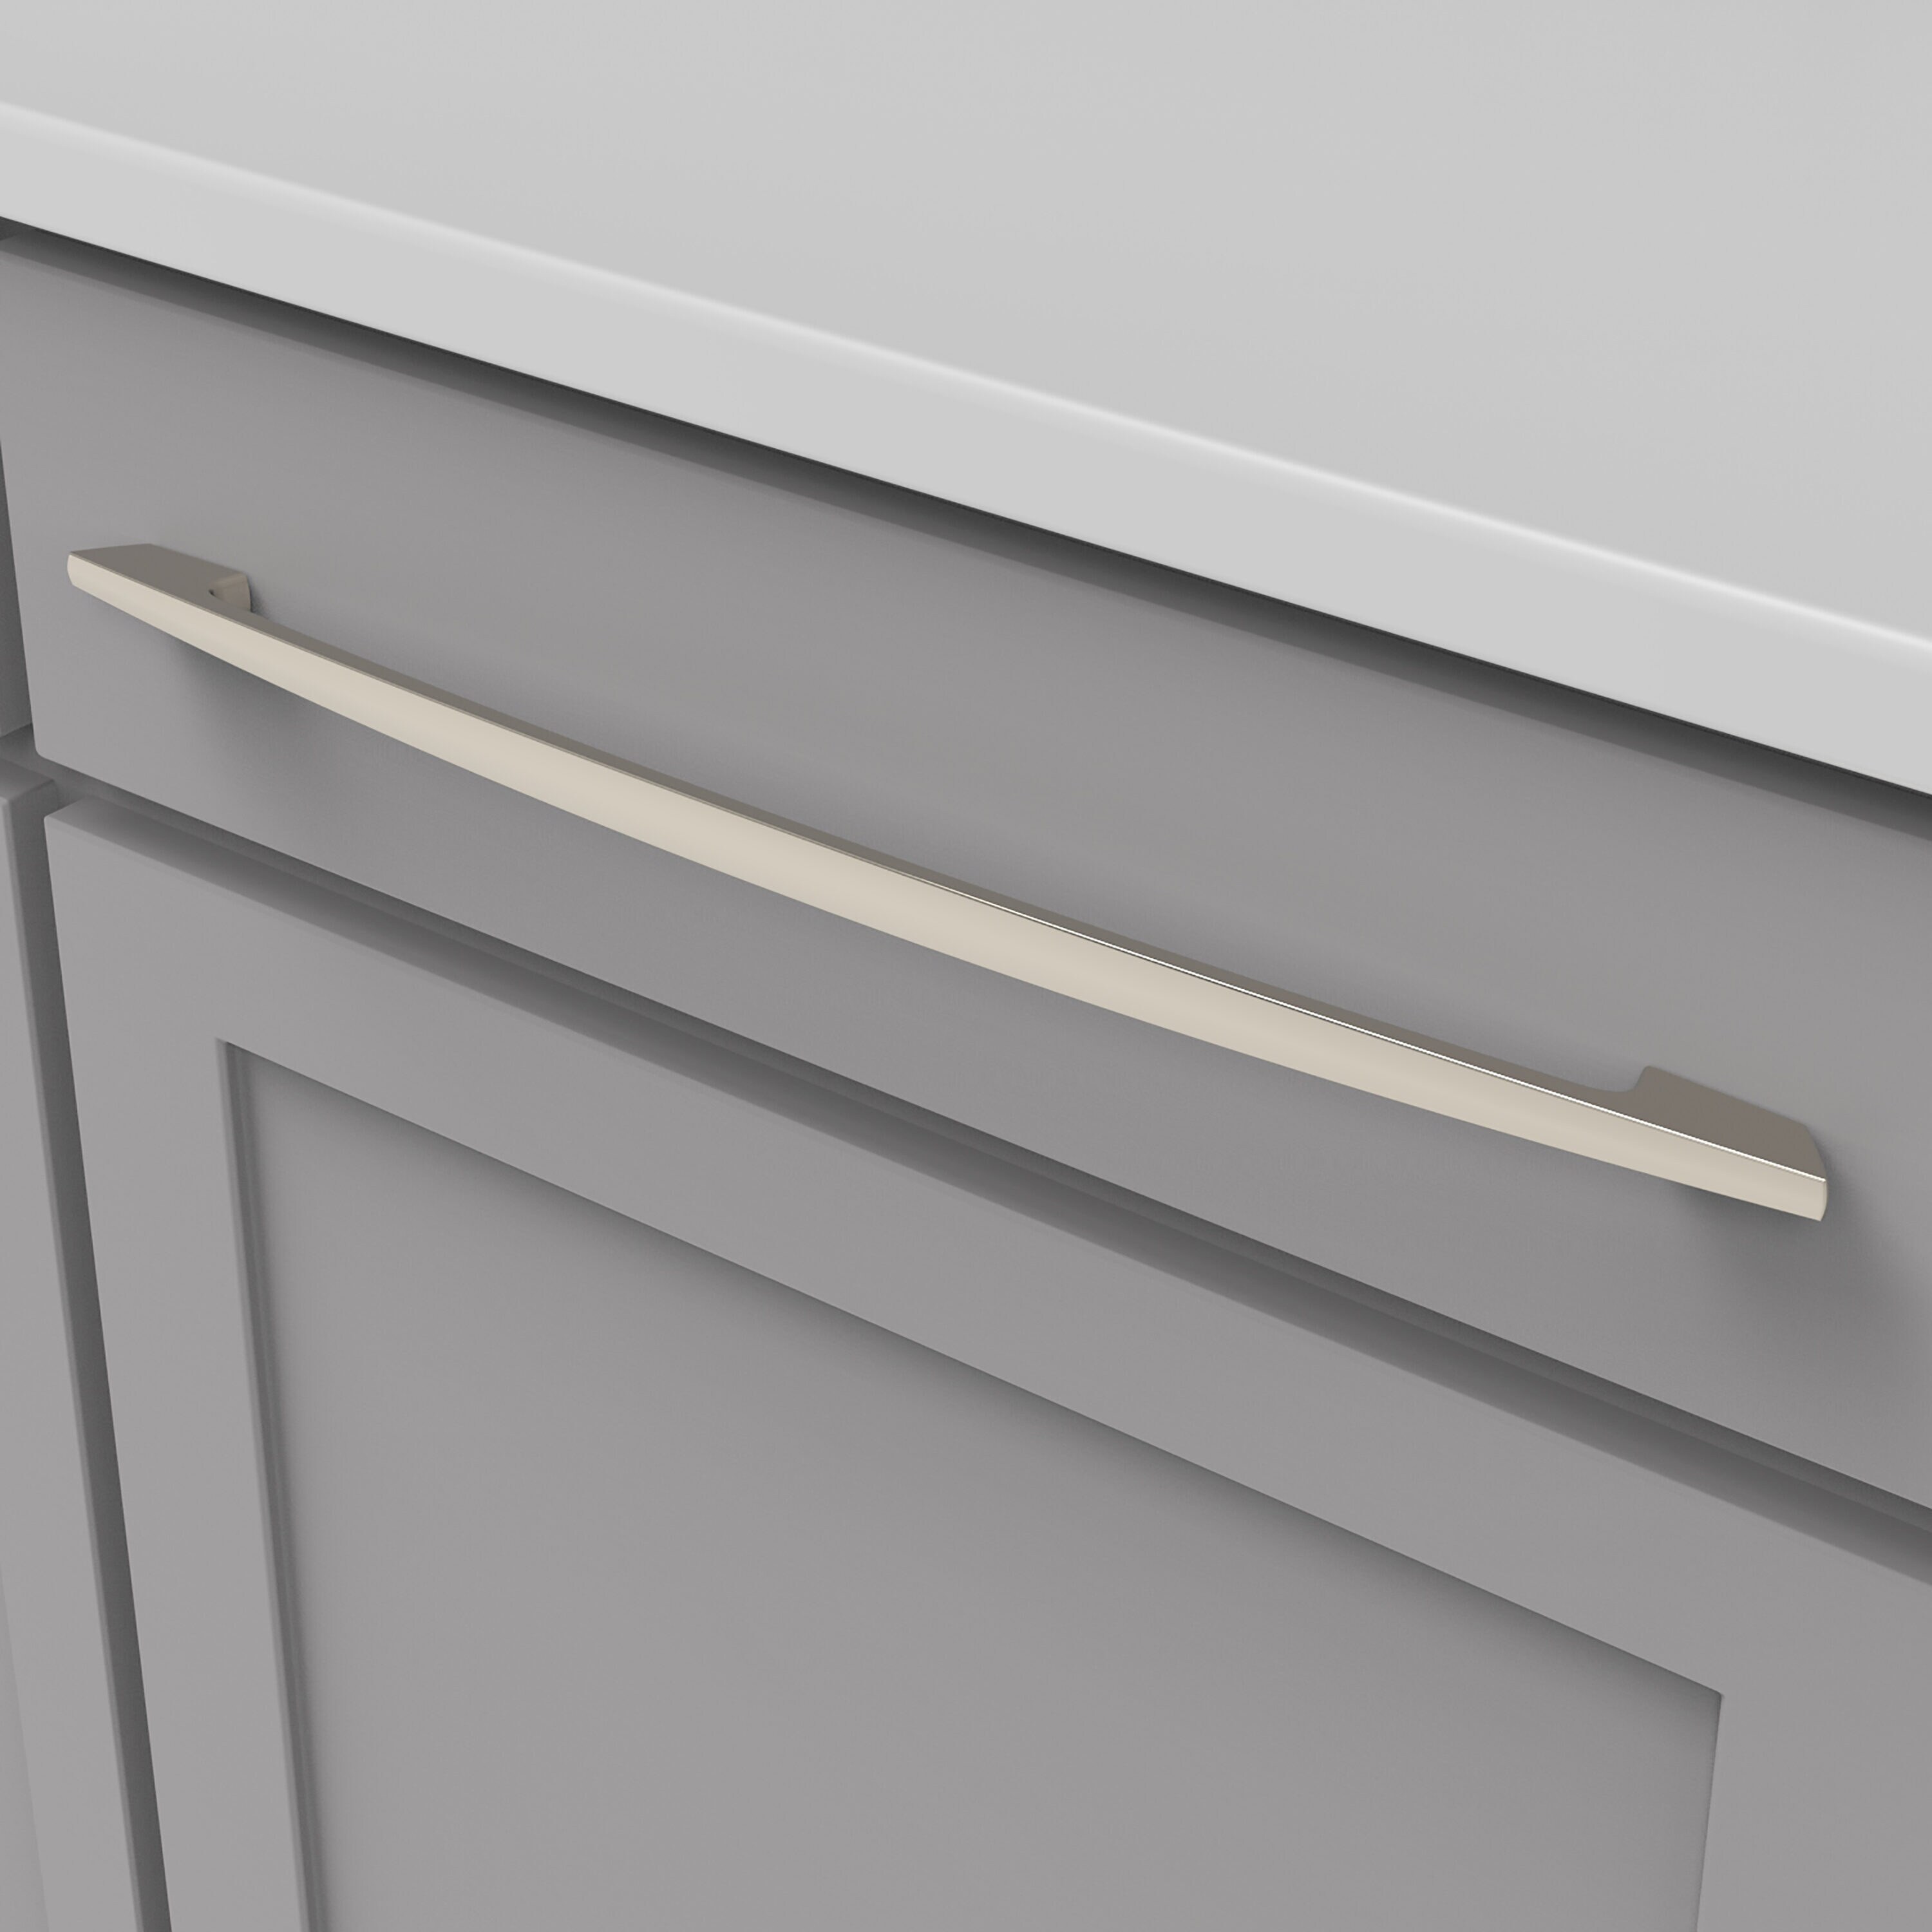 Hickory Hardware Rotterdam Contemporary Rectangle Cabinet Pull 3